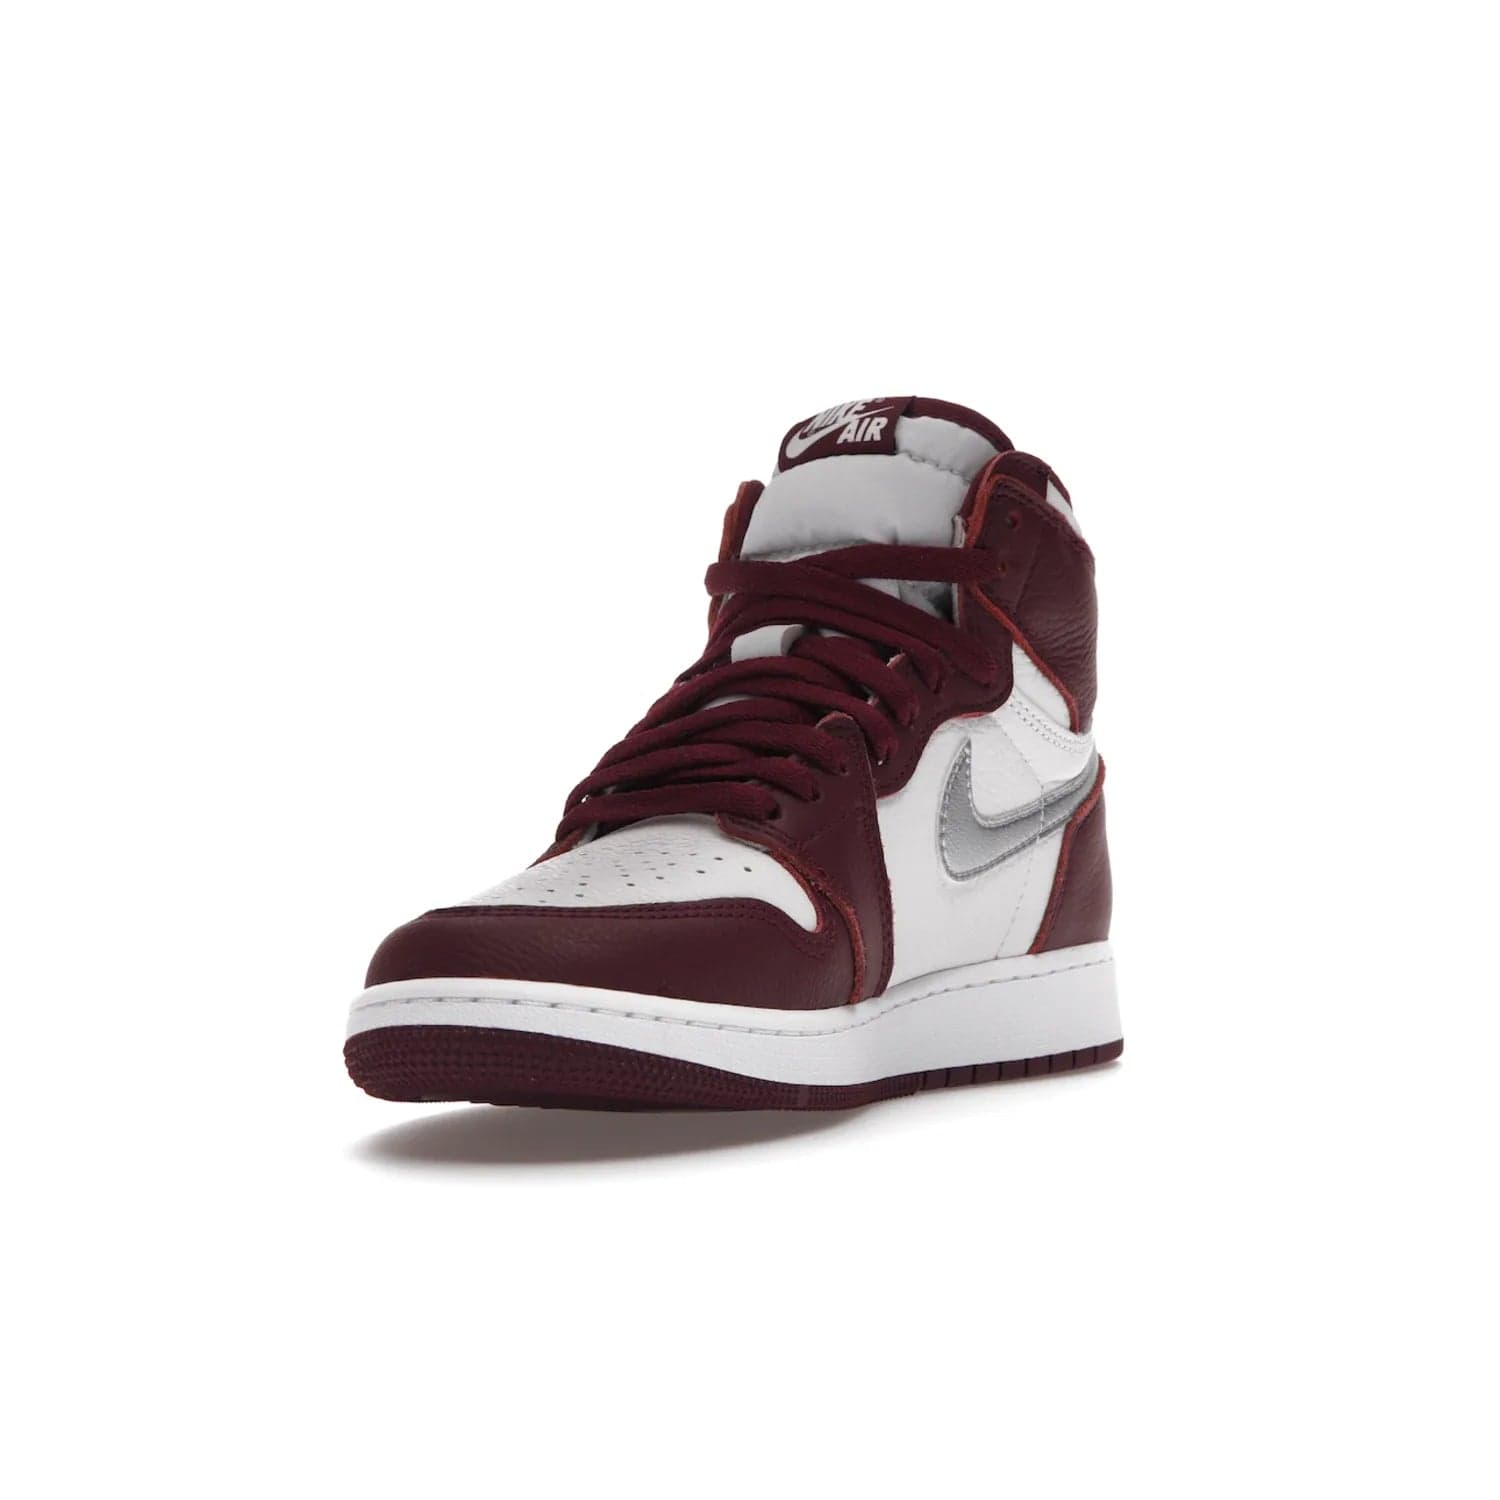 Jordan 1 Retro High OG Bordeaux (GS) - Image 13 - Only at www.BallersClubKickz.com - #
Introducing the Air Jordan 1 Retro High OG Bordeaux GS – a signature colorway part of the Jordan Brand Fall 2021 lineup. White leather upper & Bordeaux overlays, metallic silver swoosh, jeweled Air Jordan Wings logo & more. Step up your style game with this sleek fall season silhouette.